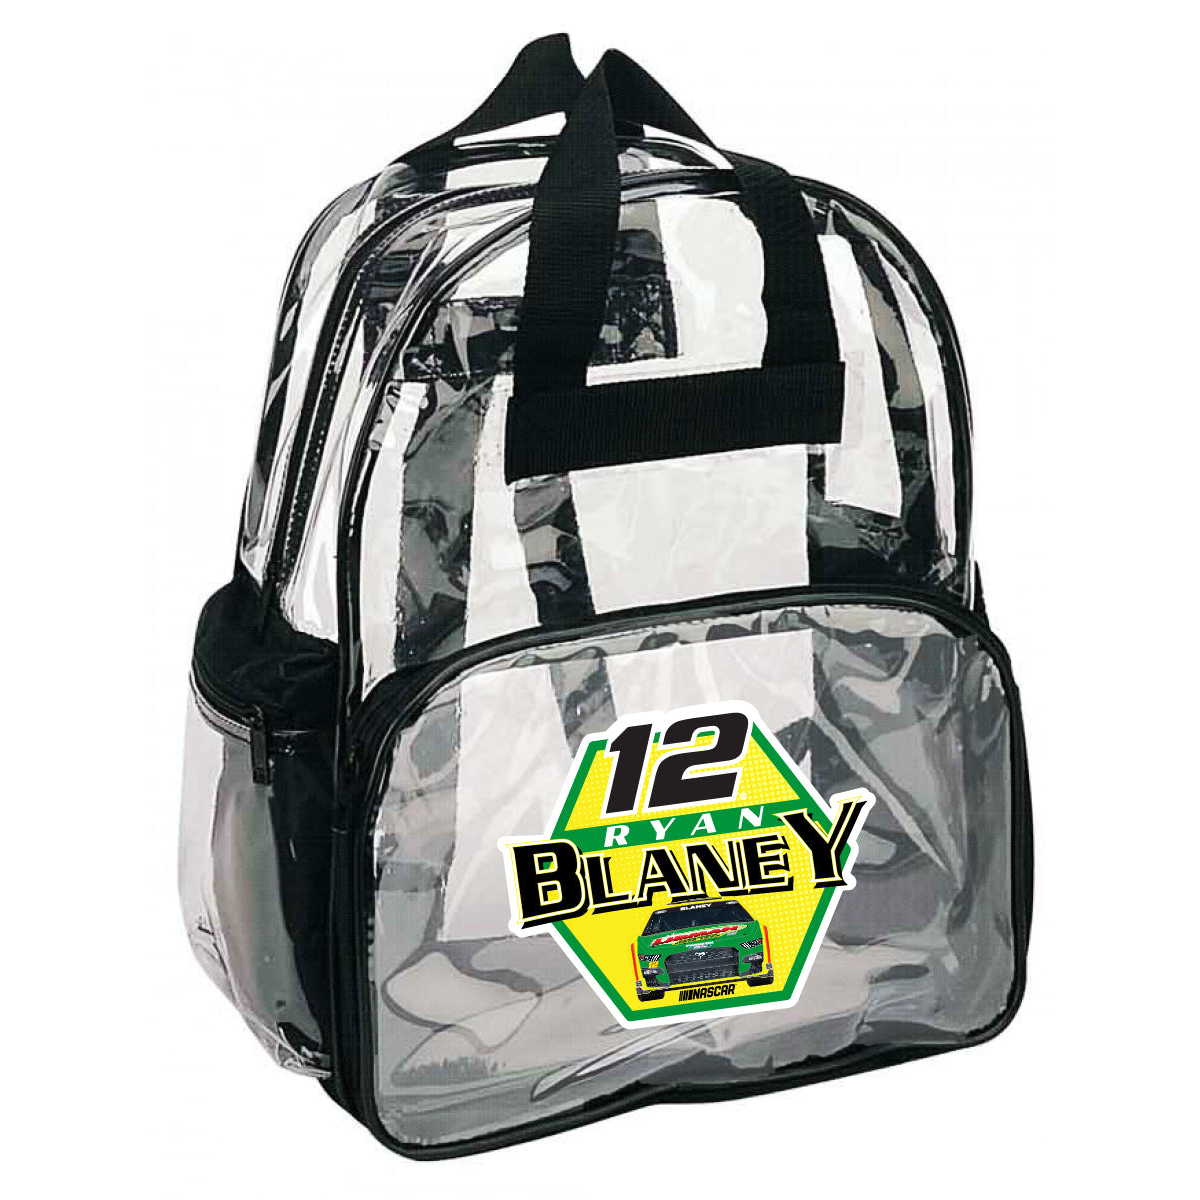 #12 Ryan Blaney Officially Licensed Clear Backpack